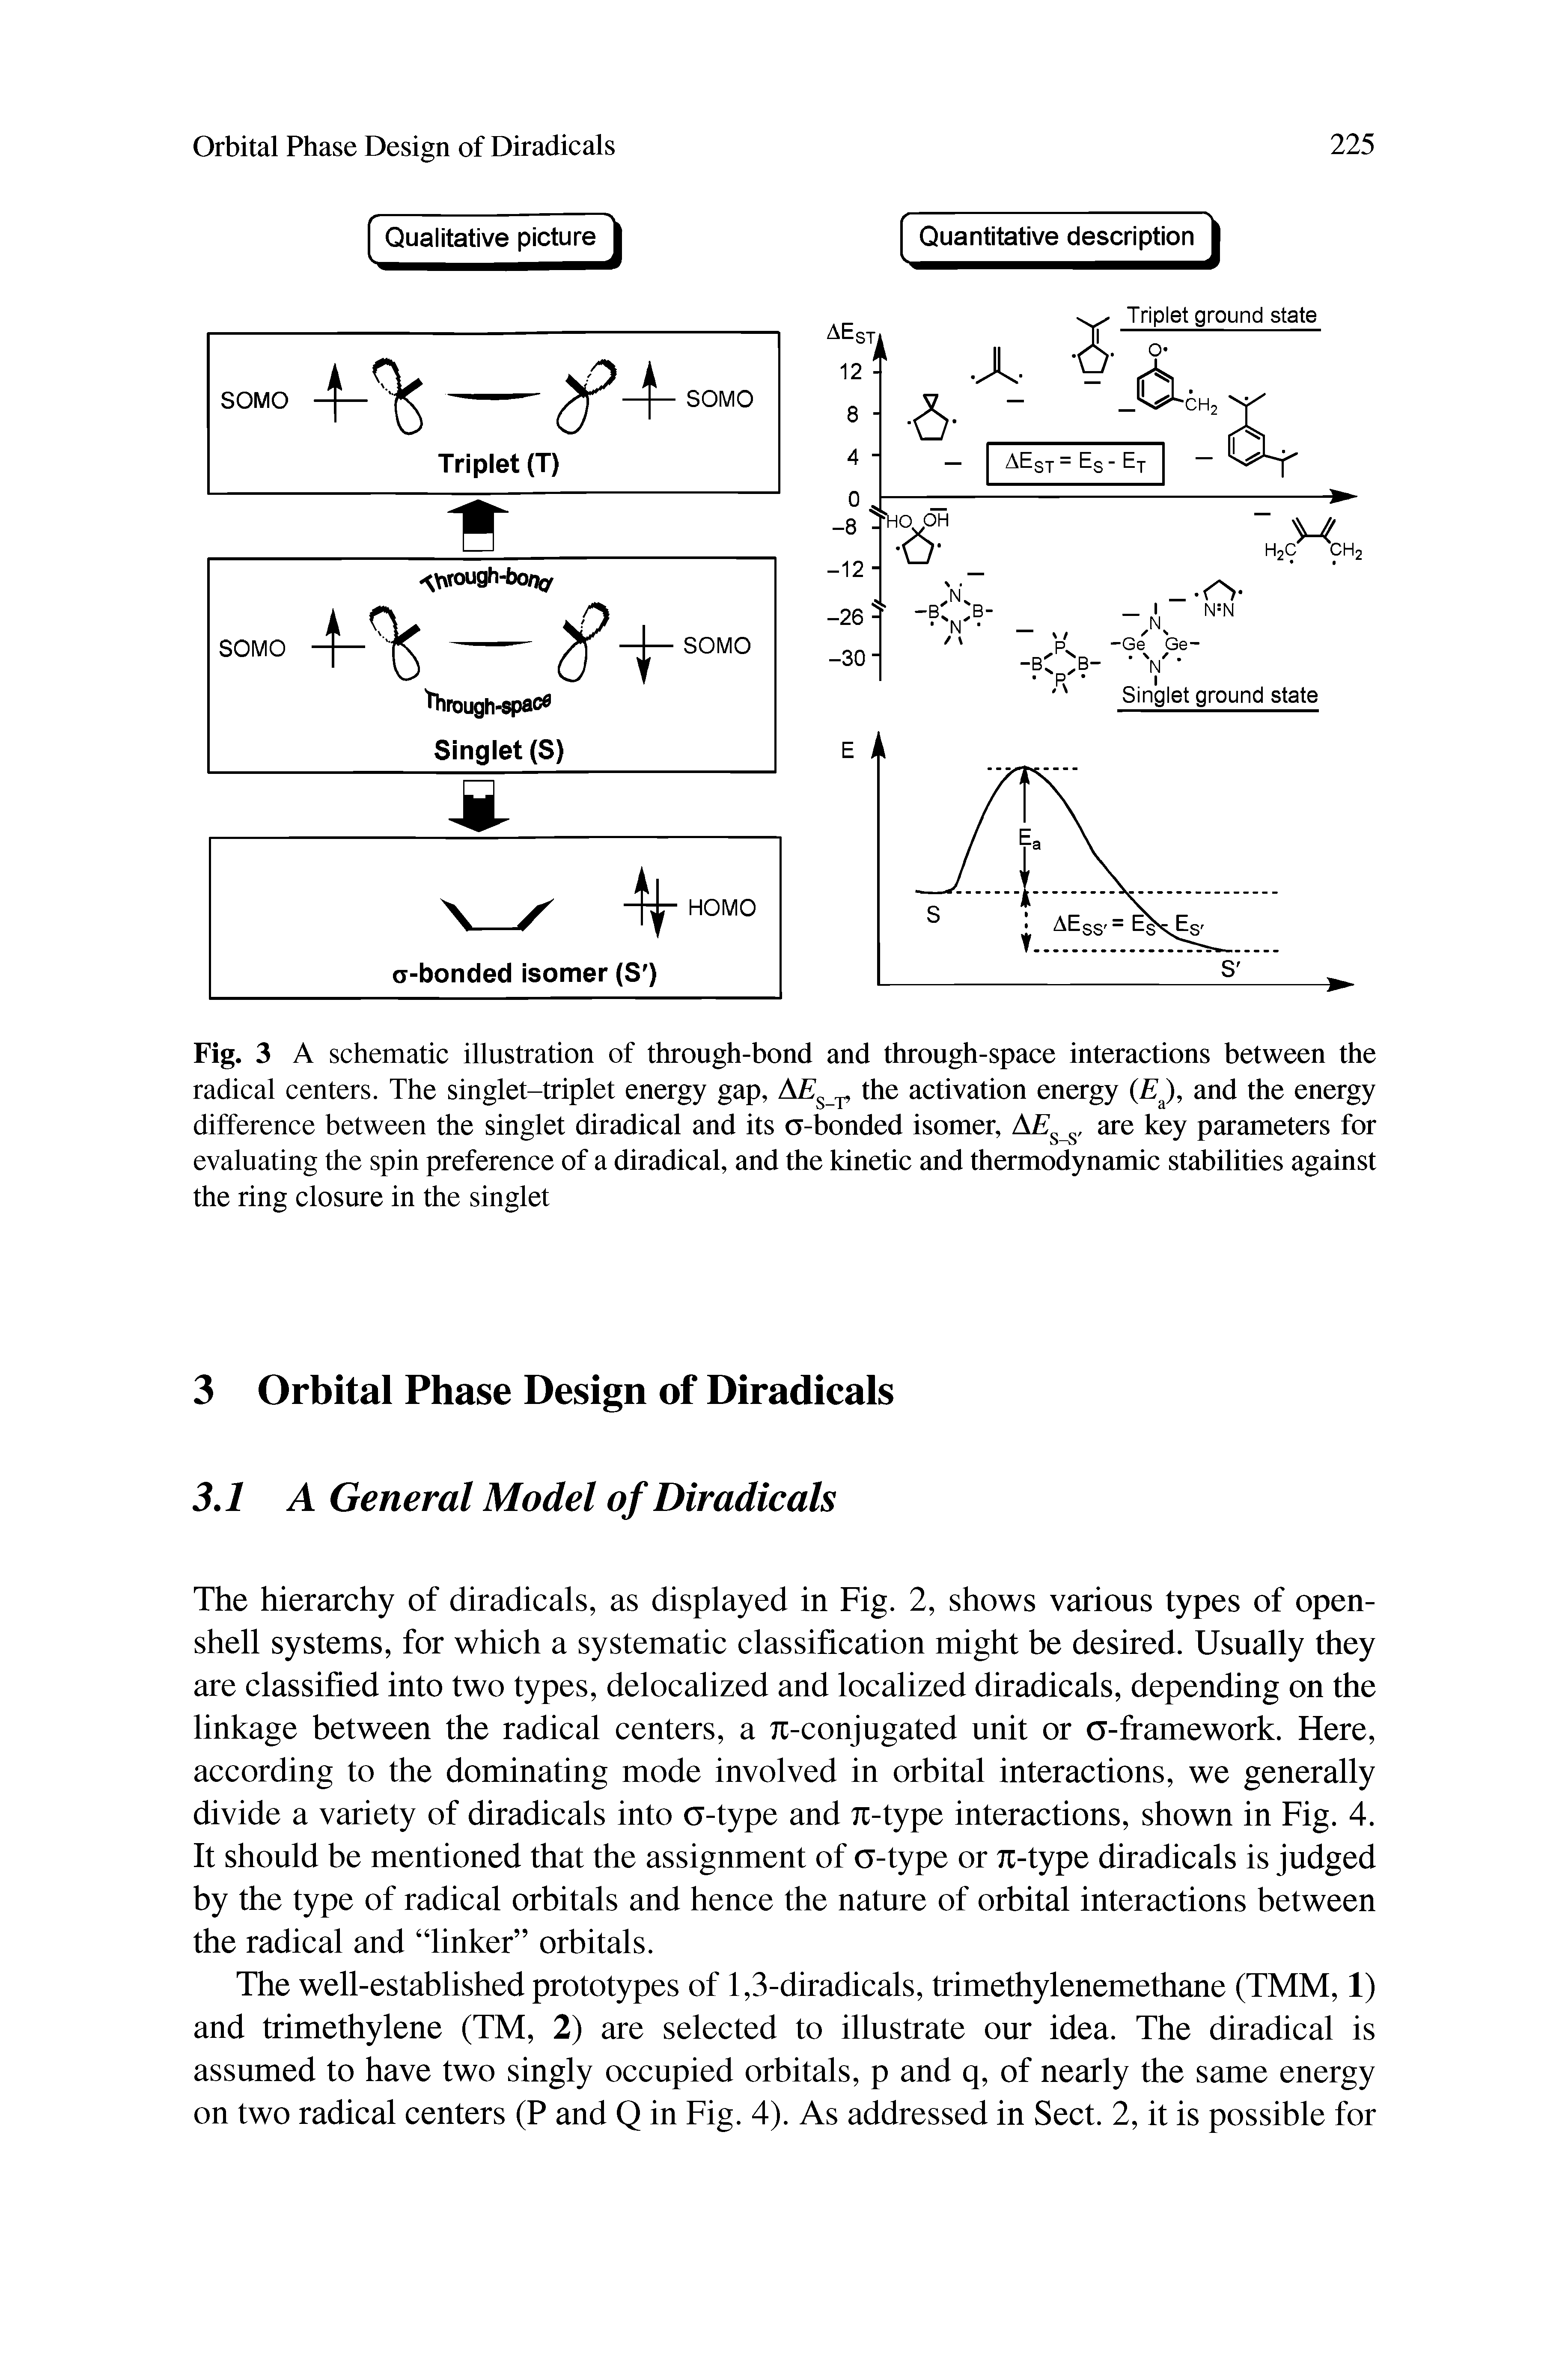 Fig. 3 A schematic illustration of through-bond and through-space interactions between the radical centers. The singlet-triplet energy gap, the activation energy (E, and the energy...